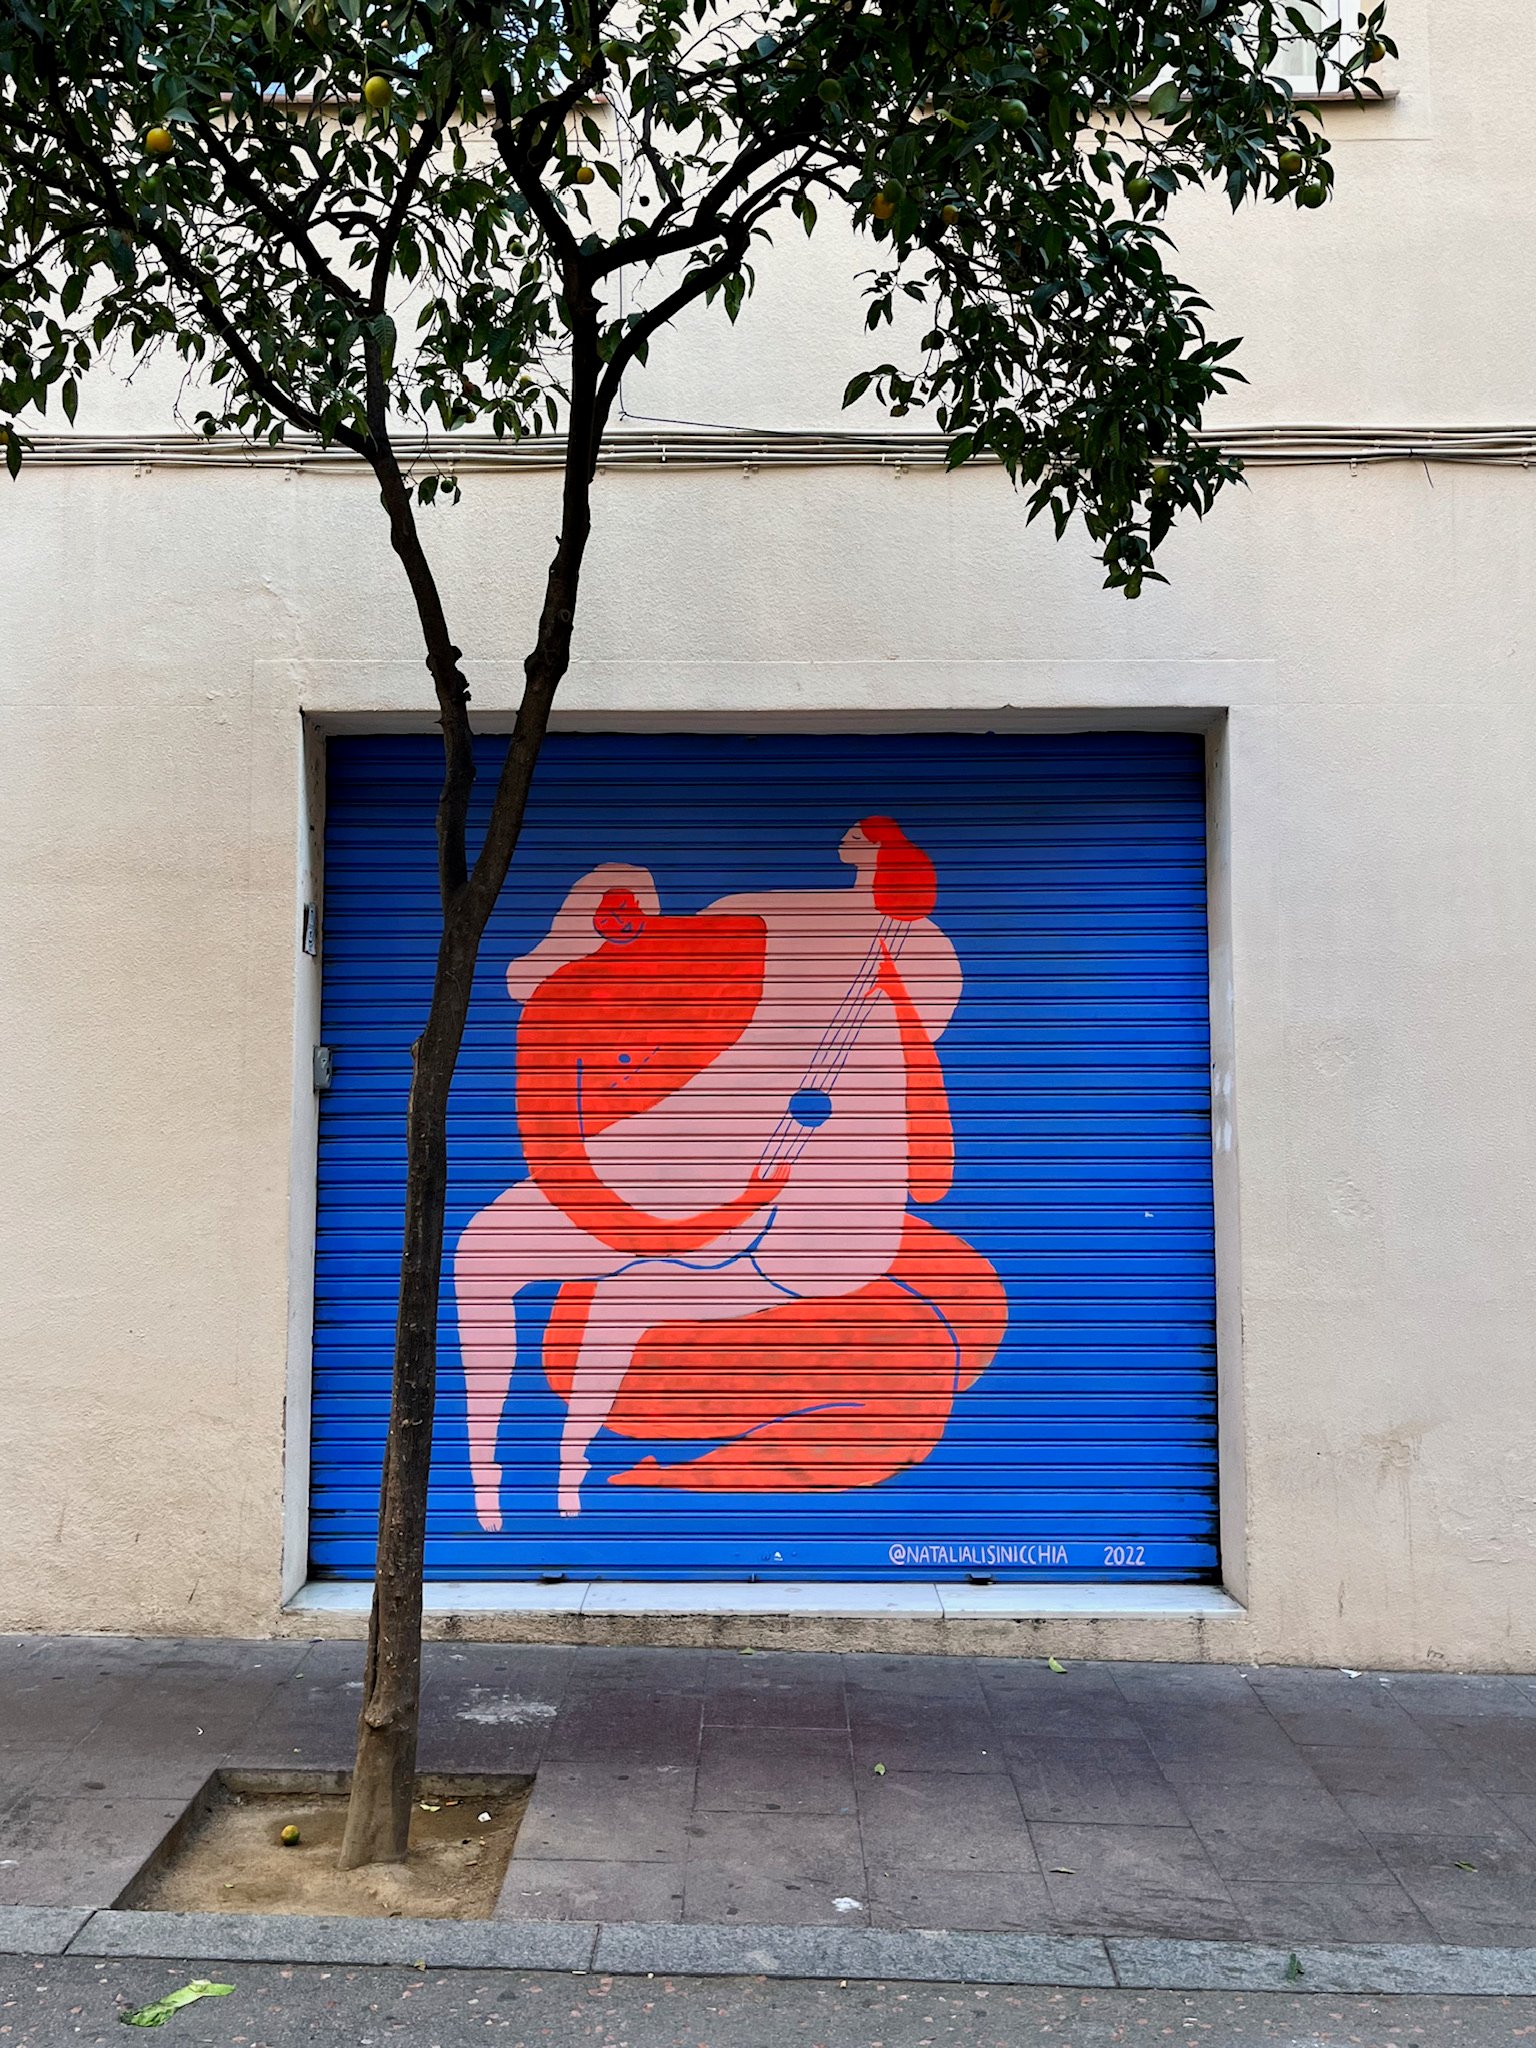 Barcelona street art with bright blue background and a woman sitting on another woman with her back shaped like a string instrument, being played.